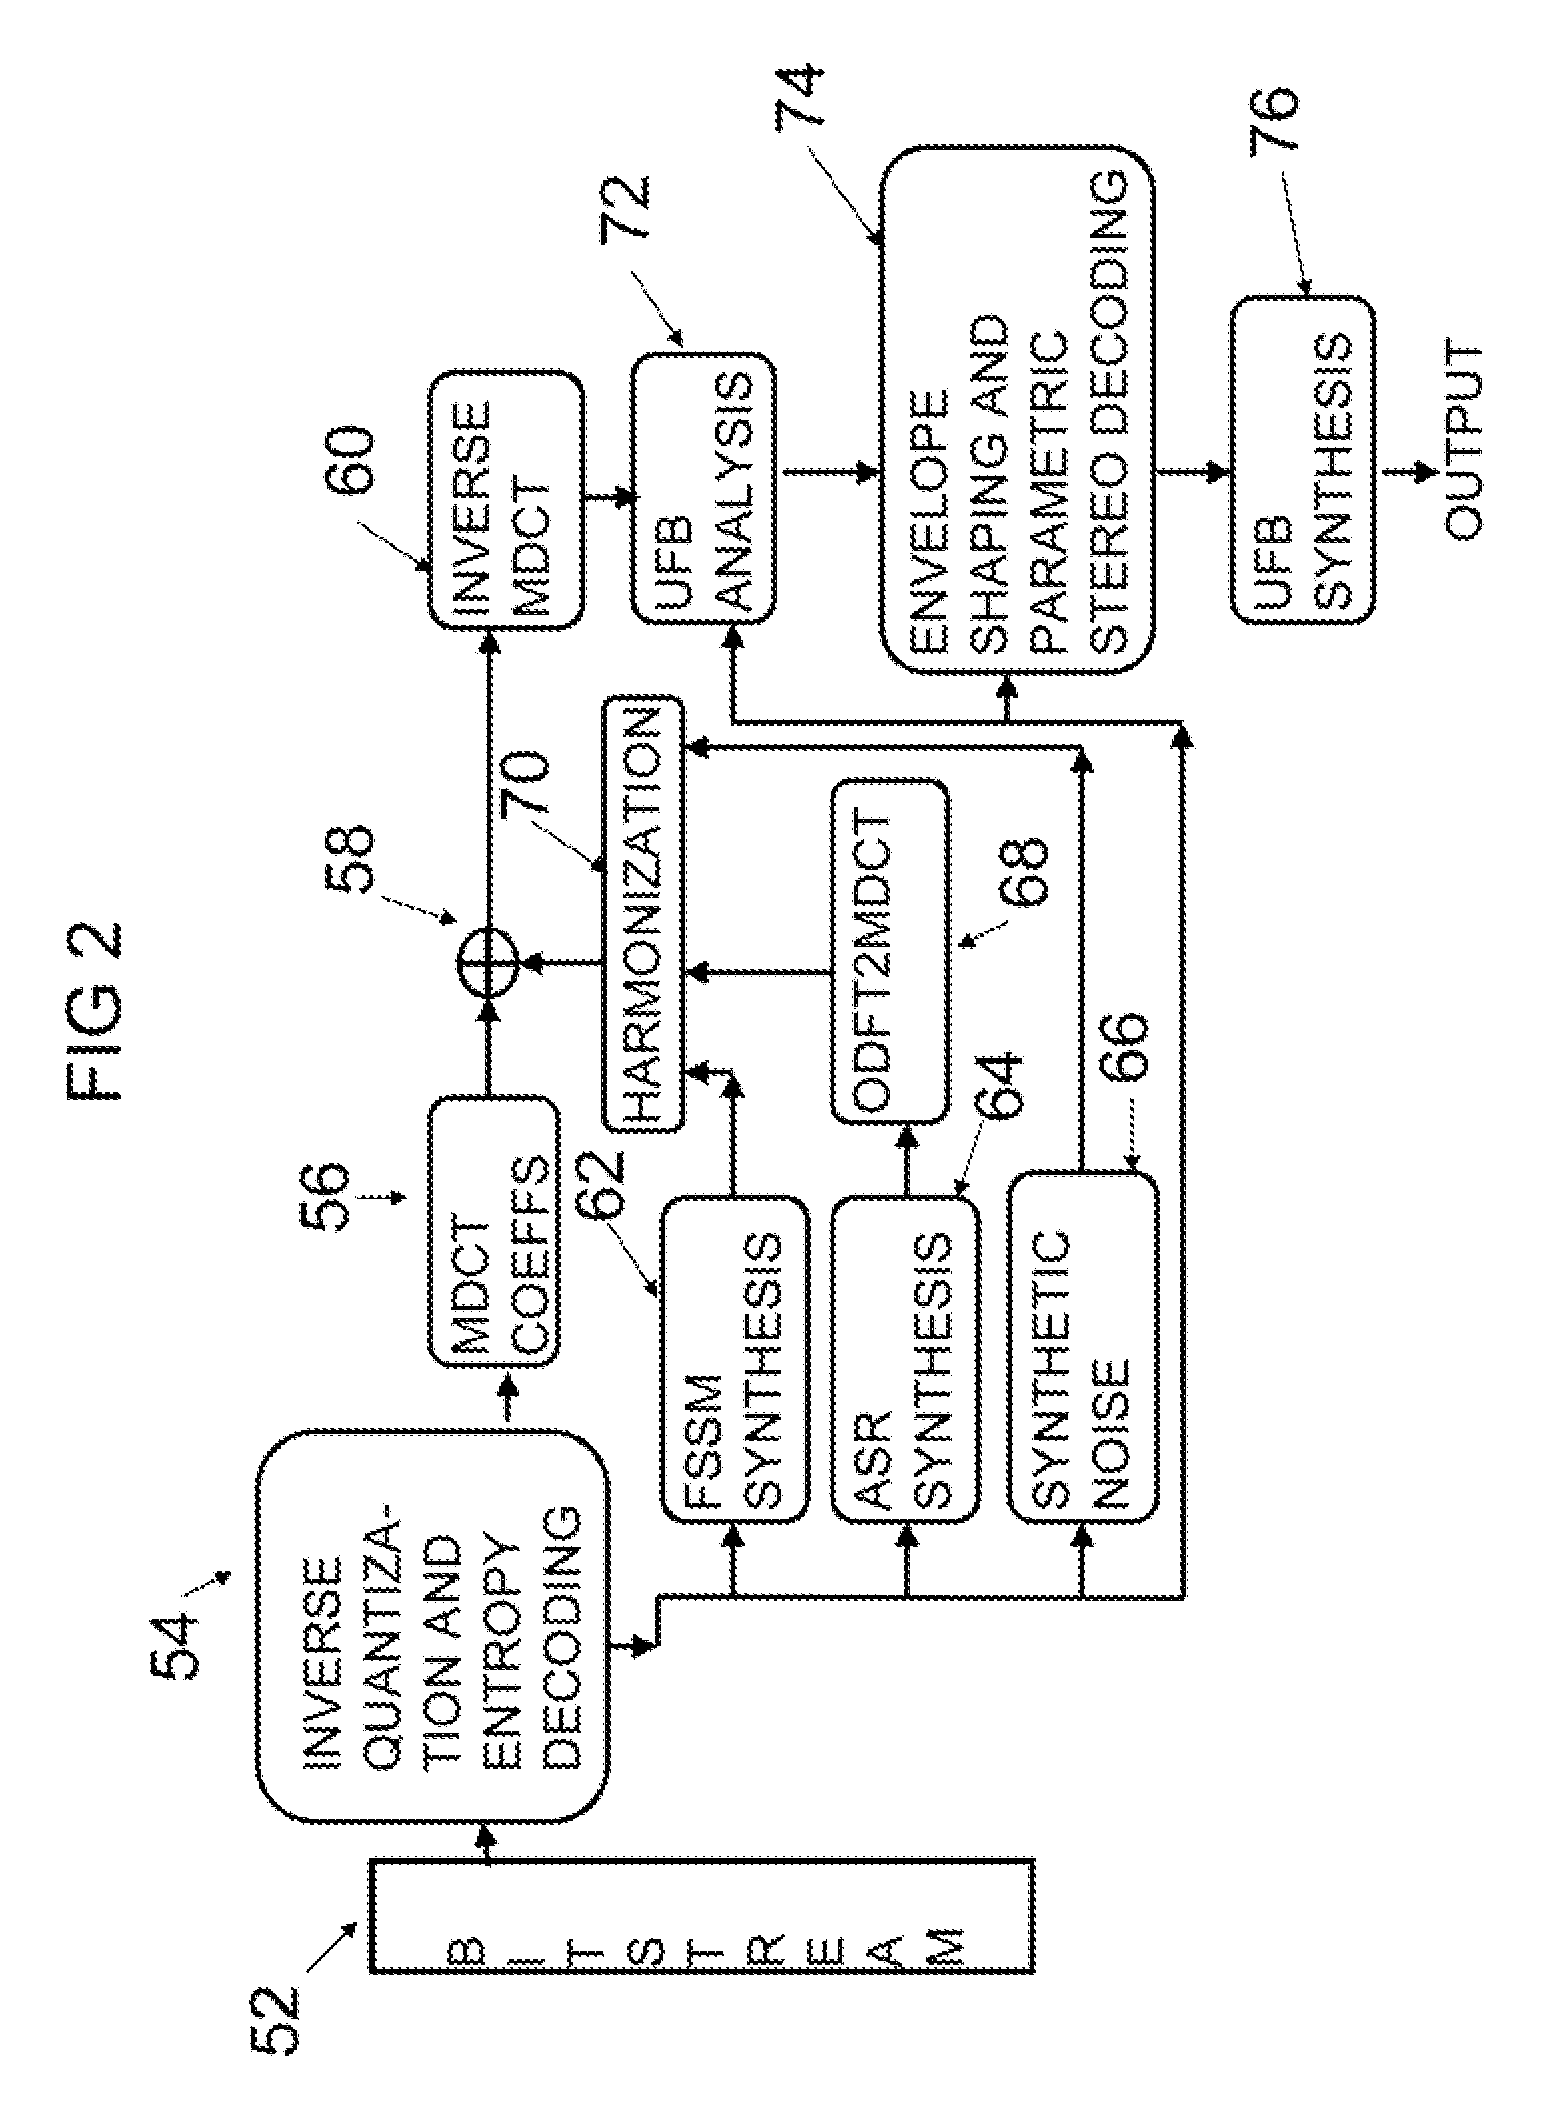 Method and apparatus for audio encoding and decoding using wideband psychoacoustic modeling and bandwidth extension